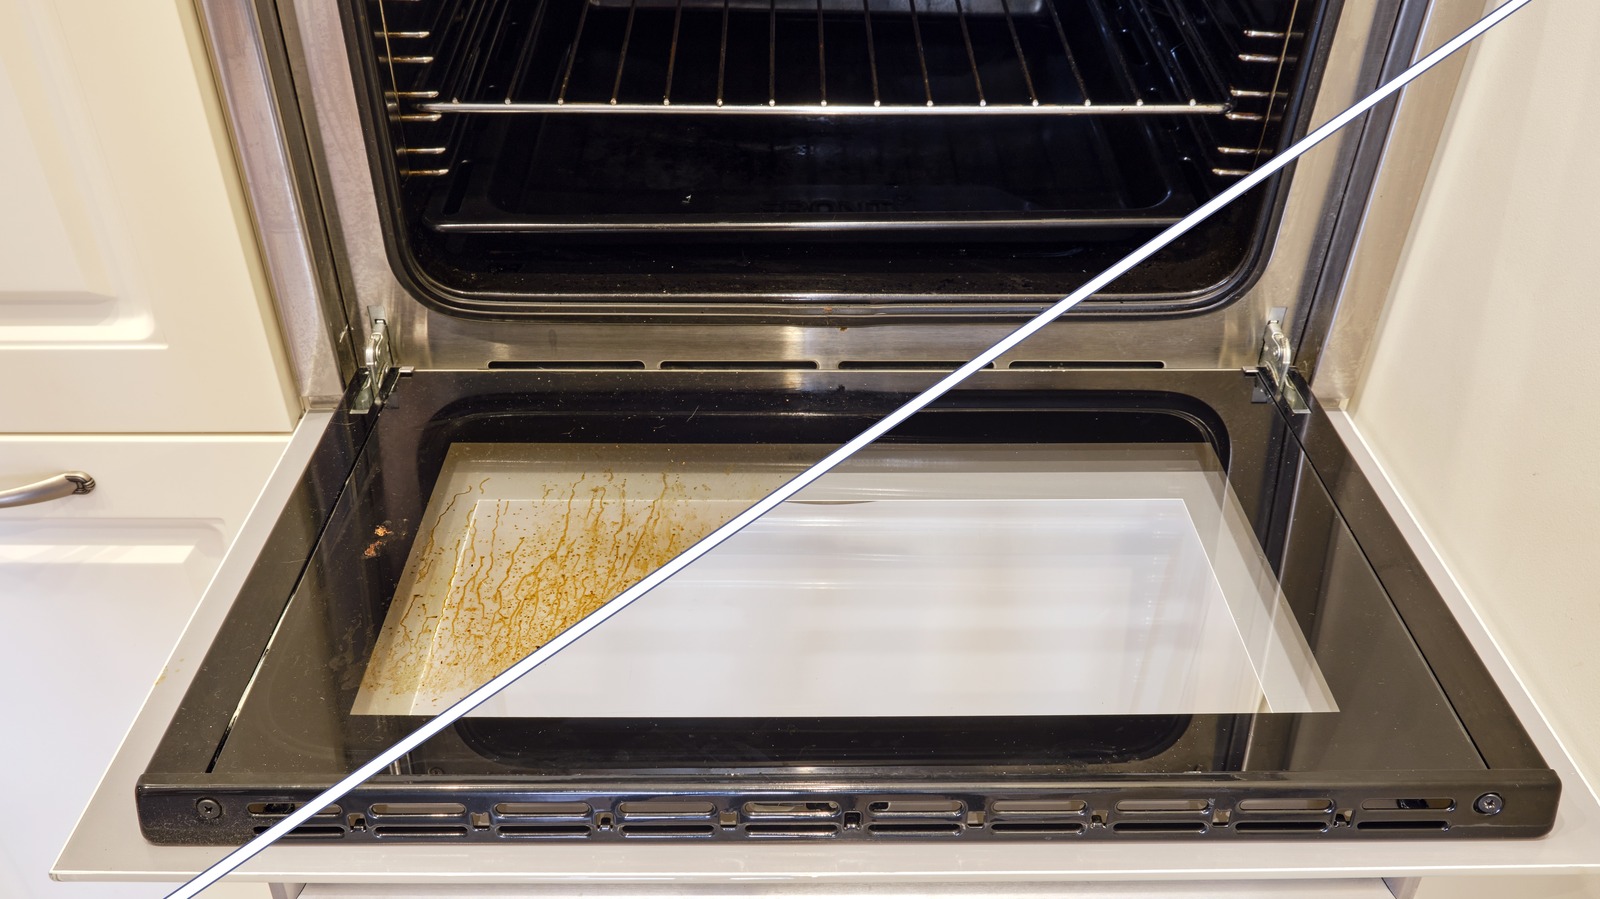 https://www.tastingtable.com/img/gallery/11-cleaning-tips-for-keeping-your-oven-spotless/l-intro-1691610424.jpg